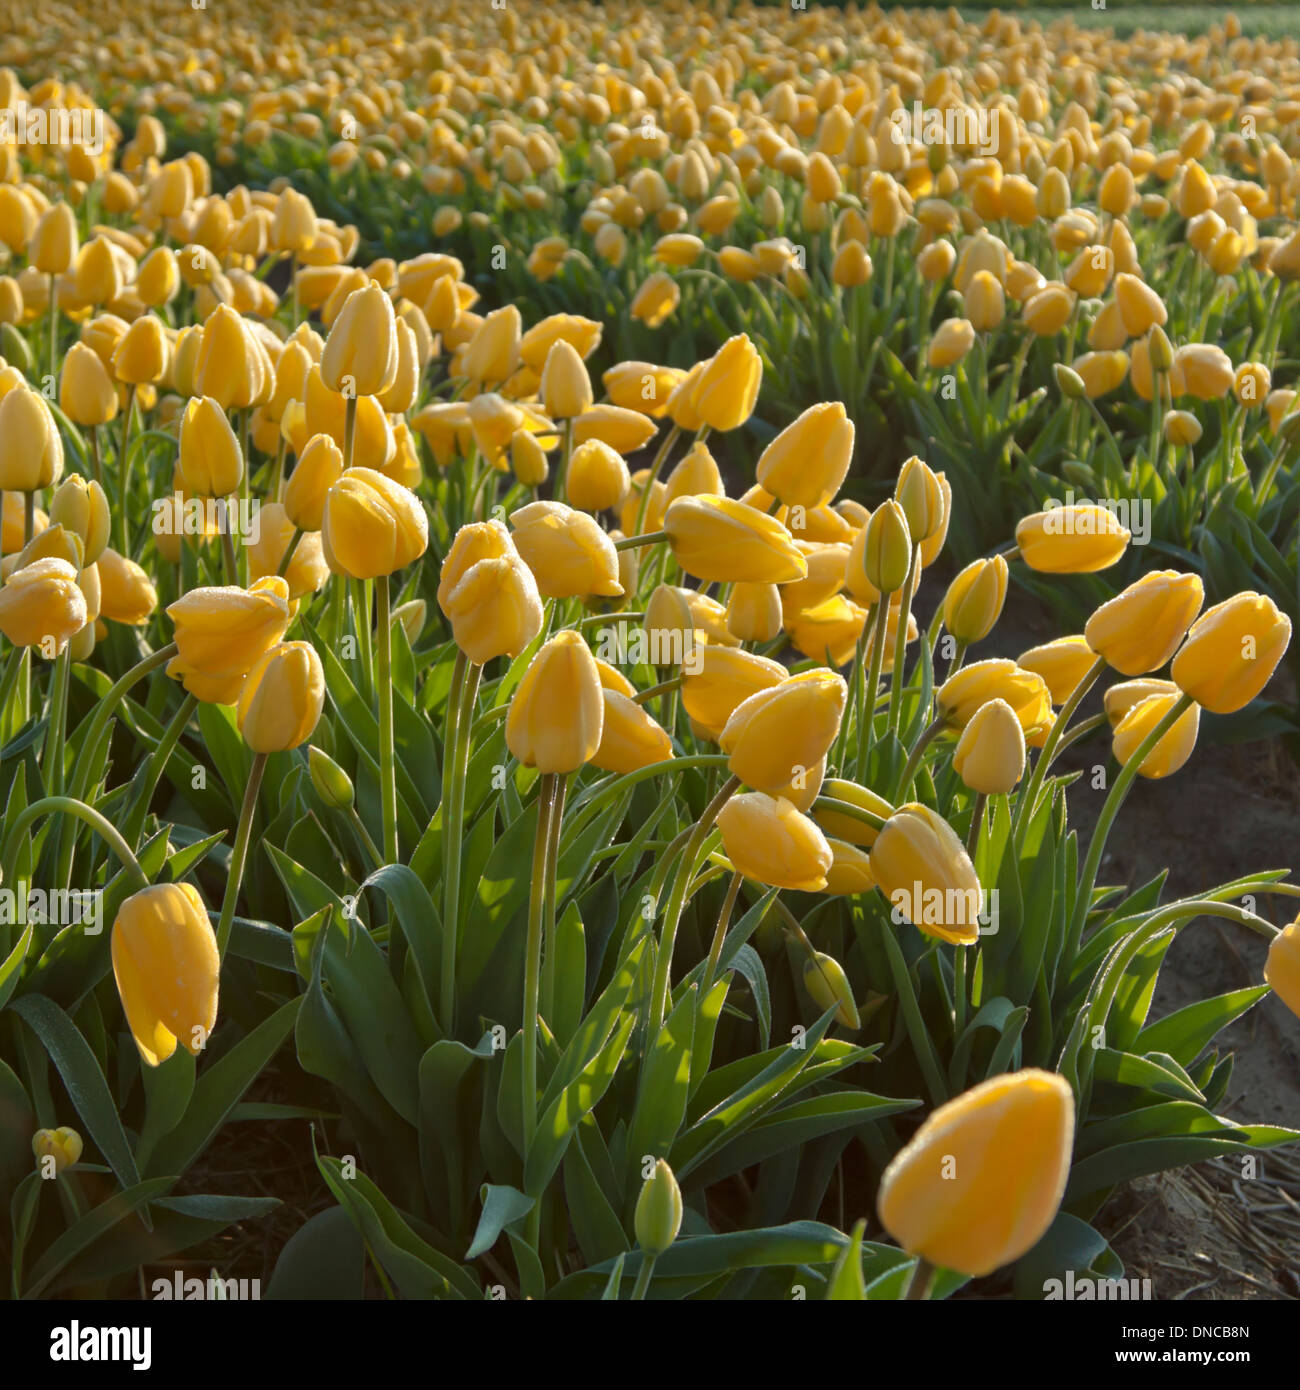 Flowering yellow tulips at Noordwijk, South Holland,The Netherlands. Spring colors and a colorful vista. Stock Photo